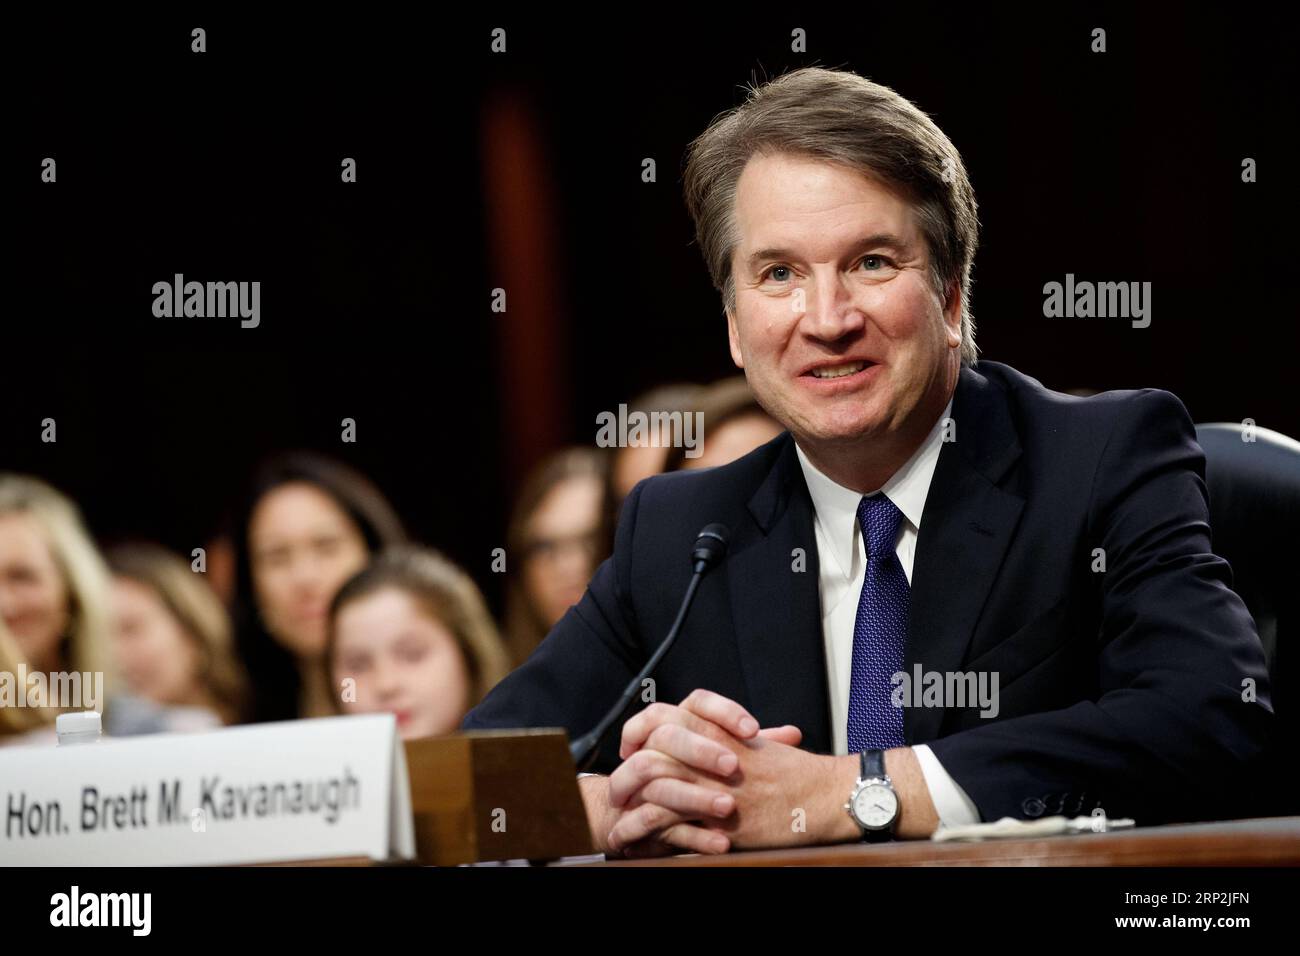 (180905) -- WASHINGTON, Sept. 5, 2018 -- U.S. Supreme Court nominee Judge Brett Kavanaugh speaks during his Senate confirmation hearing on Capitol Hill in Washington D.C., the United States, Sept. 4, 2018. The Senate confirmation hearing for Kavanaugh began Tuesday, which has descended into chaos as Democrats protested about Republicans blocking access to documents concerning the judge. ) (jmmn) U.S.-WASHINGTON D.C.-BRETT KAVANAUGH-HEARING TingxShen PUBLICATIONxNOTxINxCHN Stock Photo